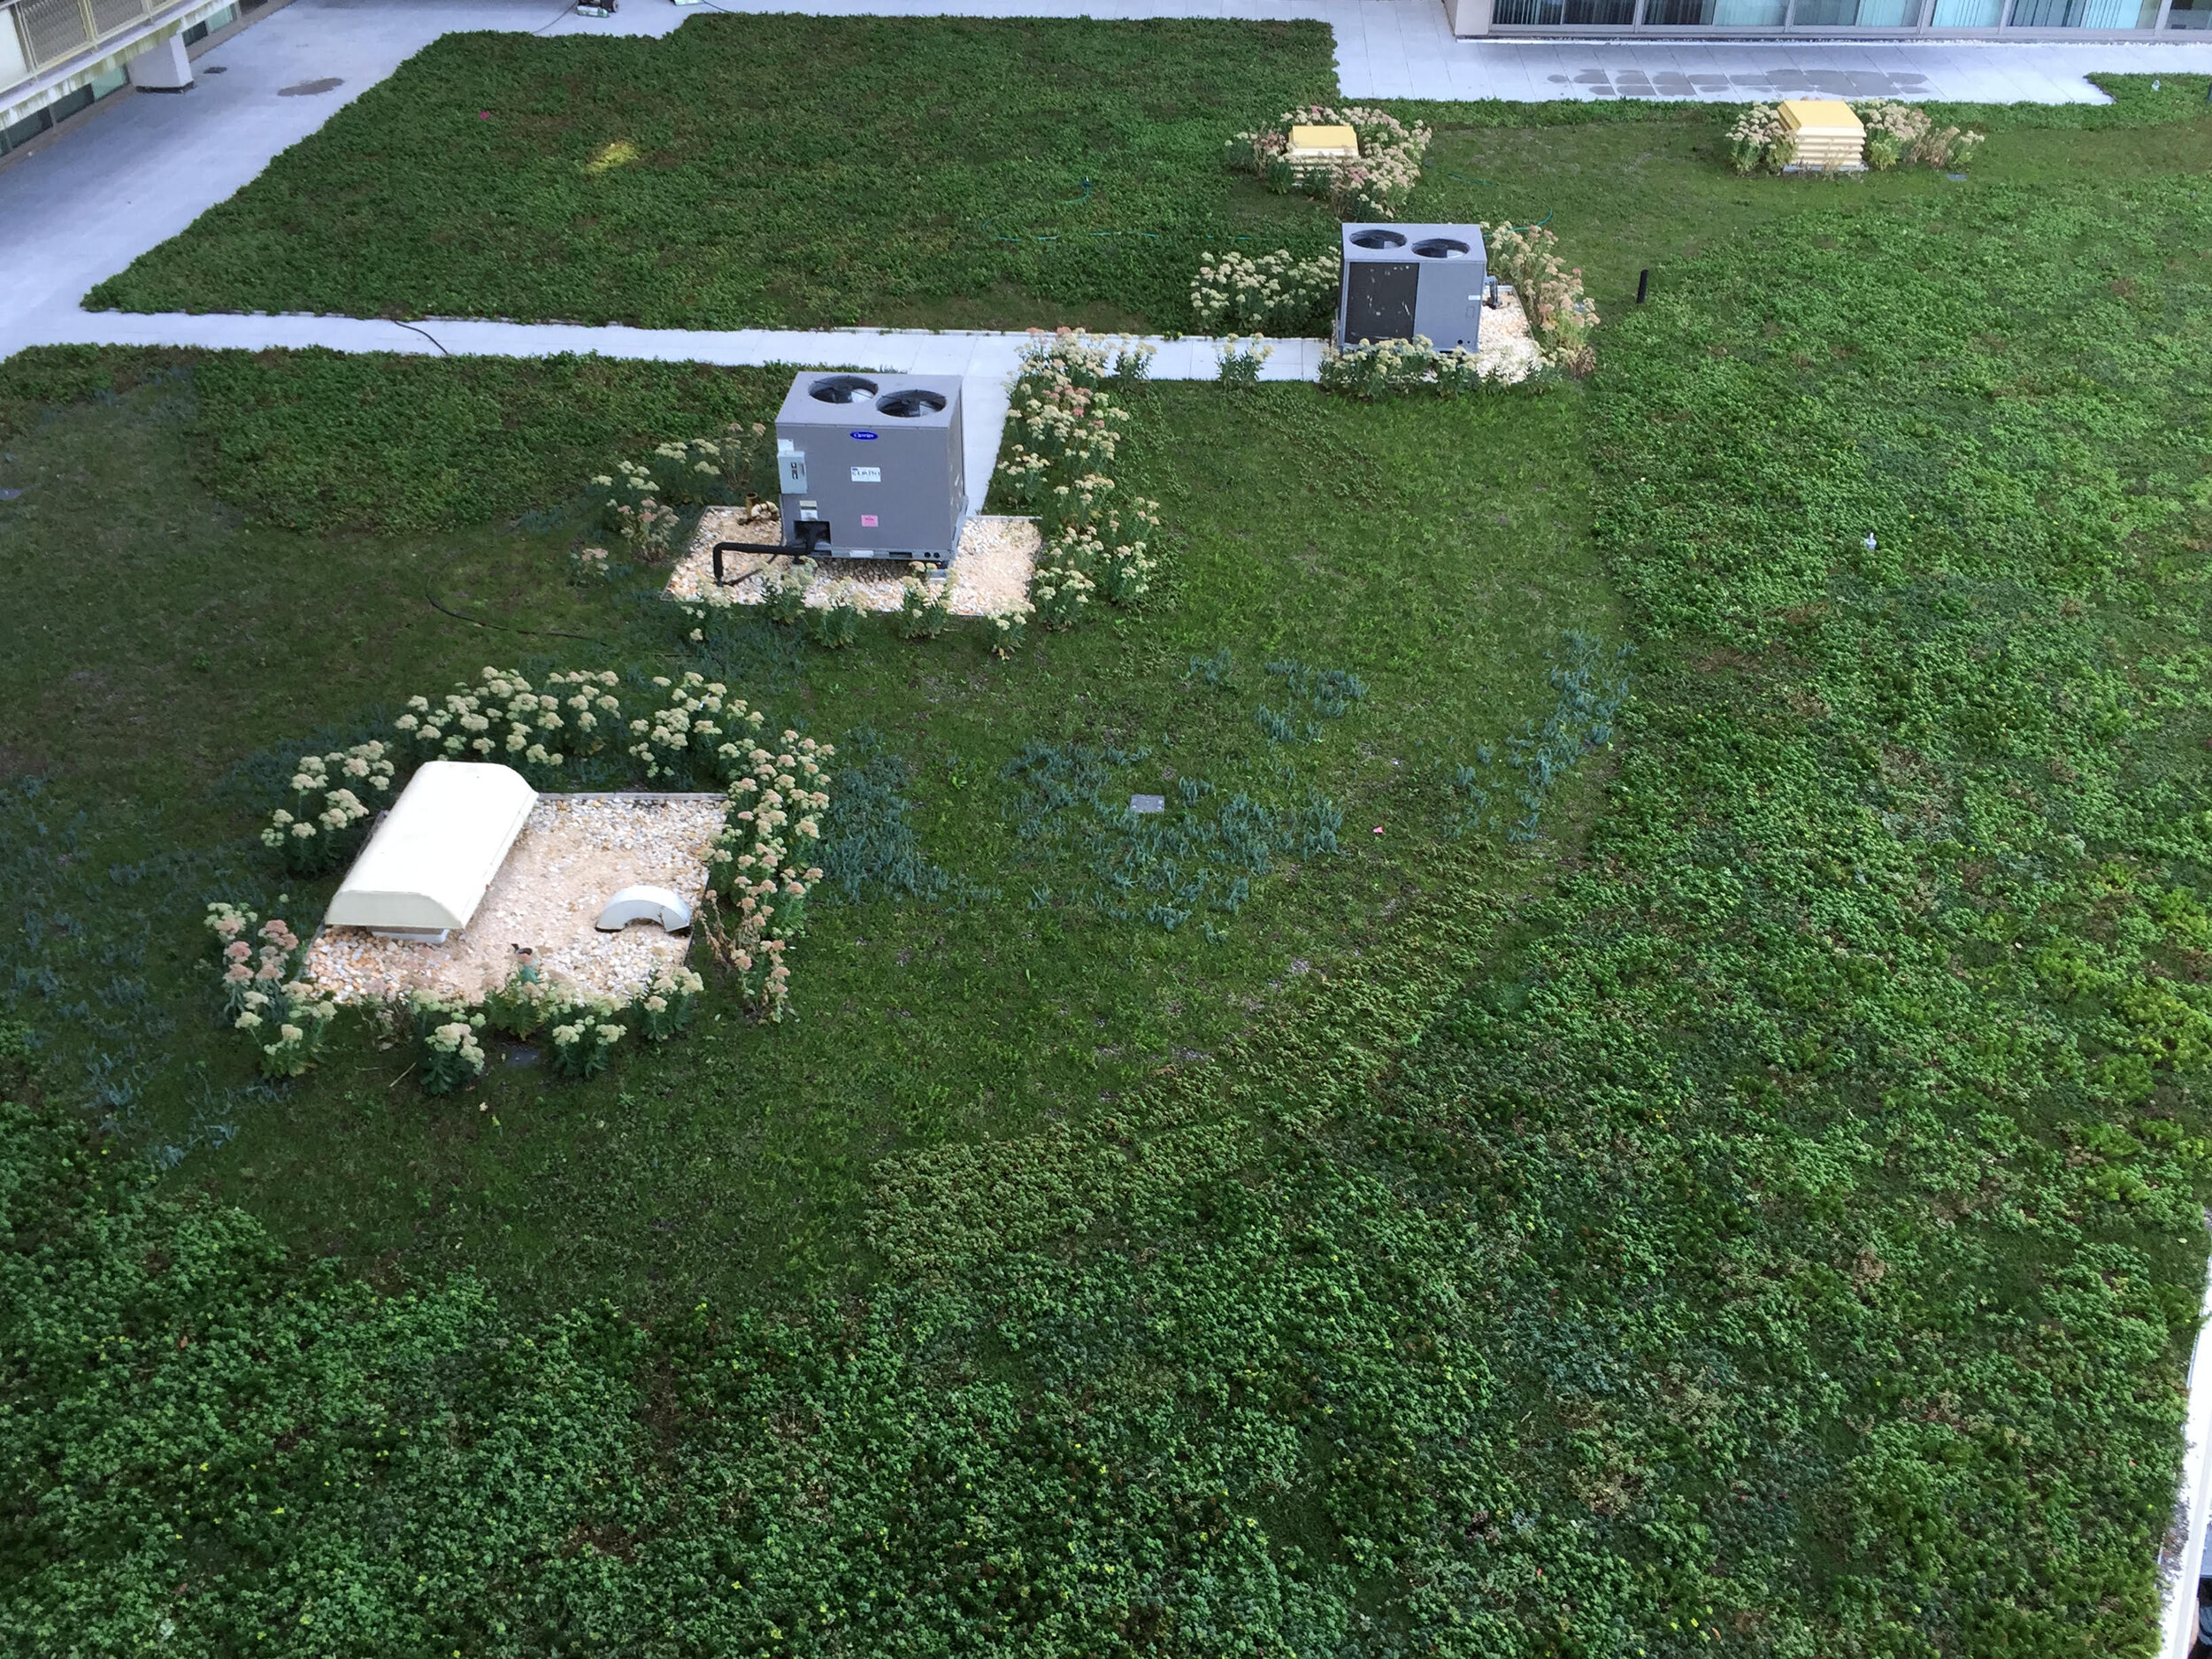 green roof with air conditioning equipment